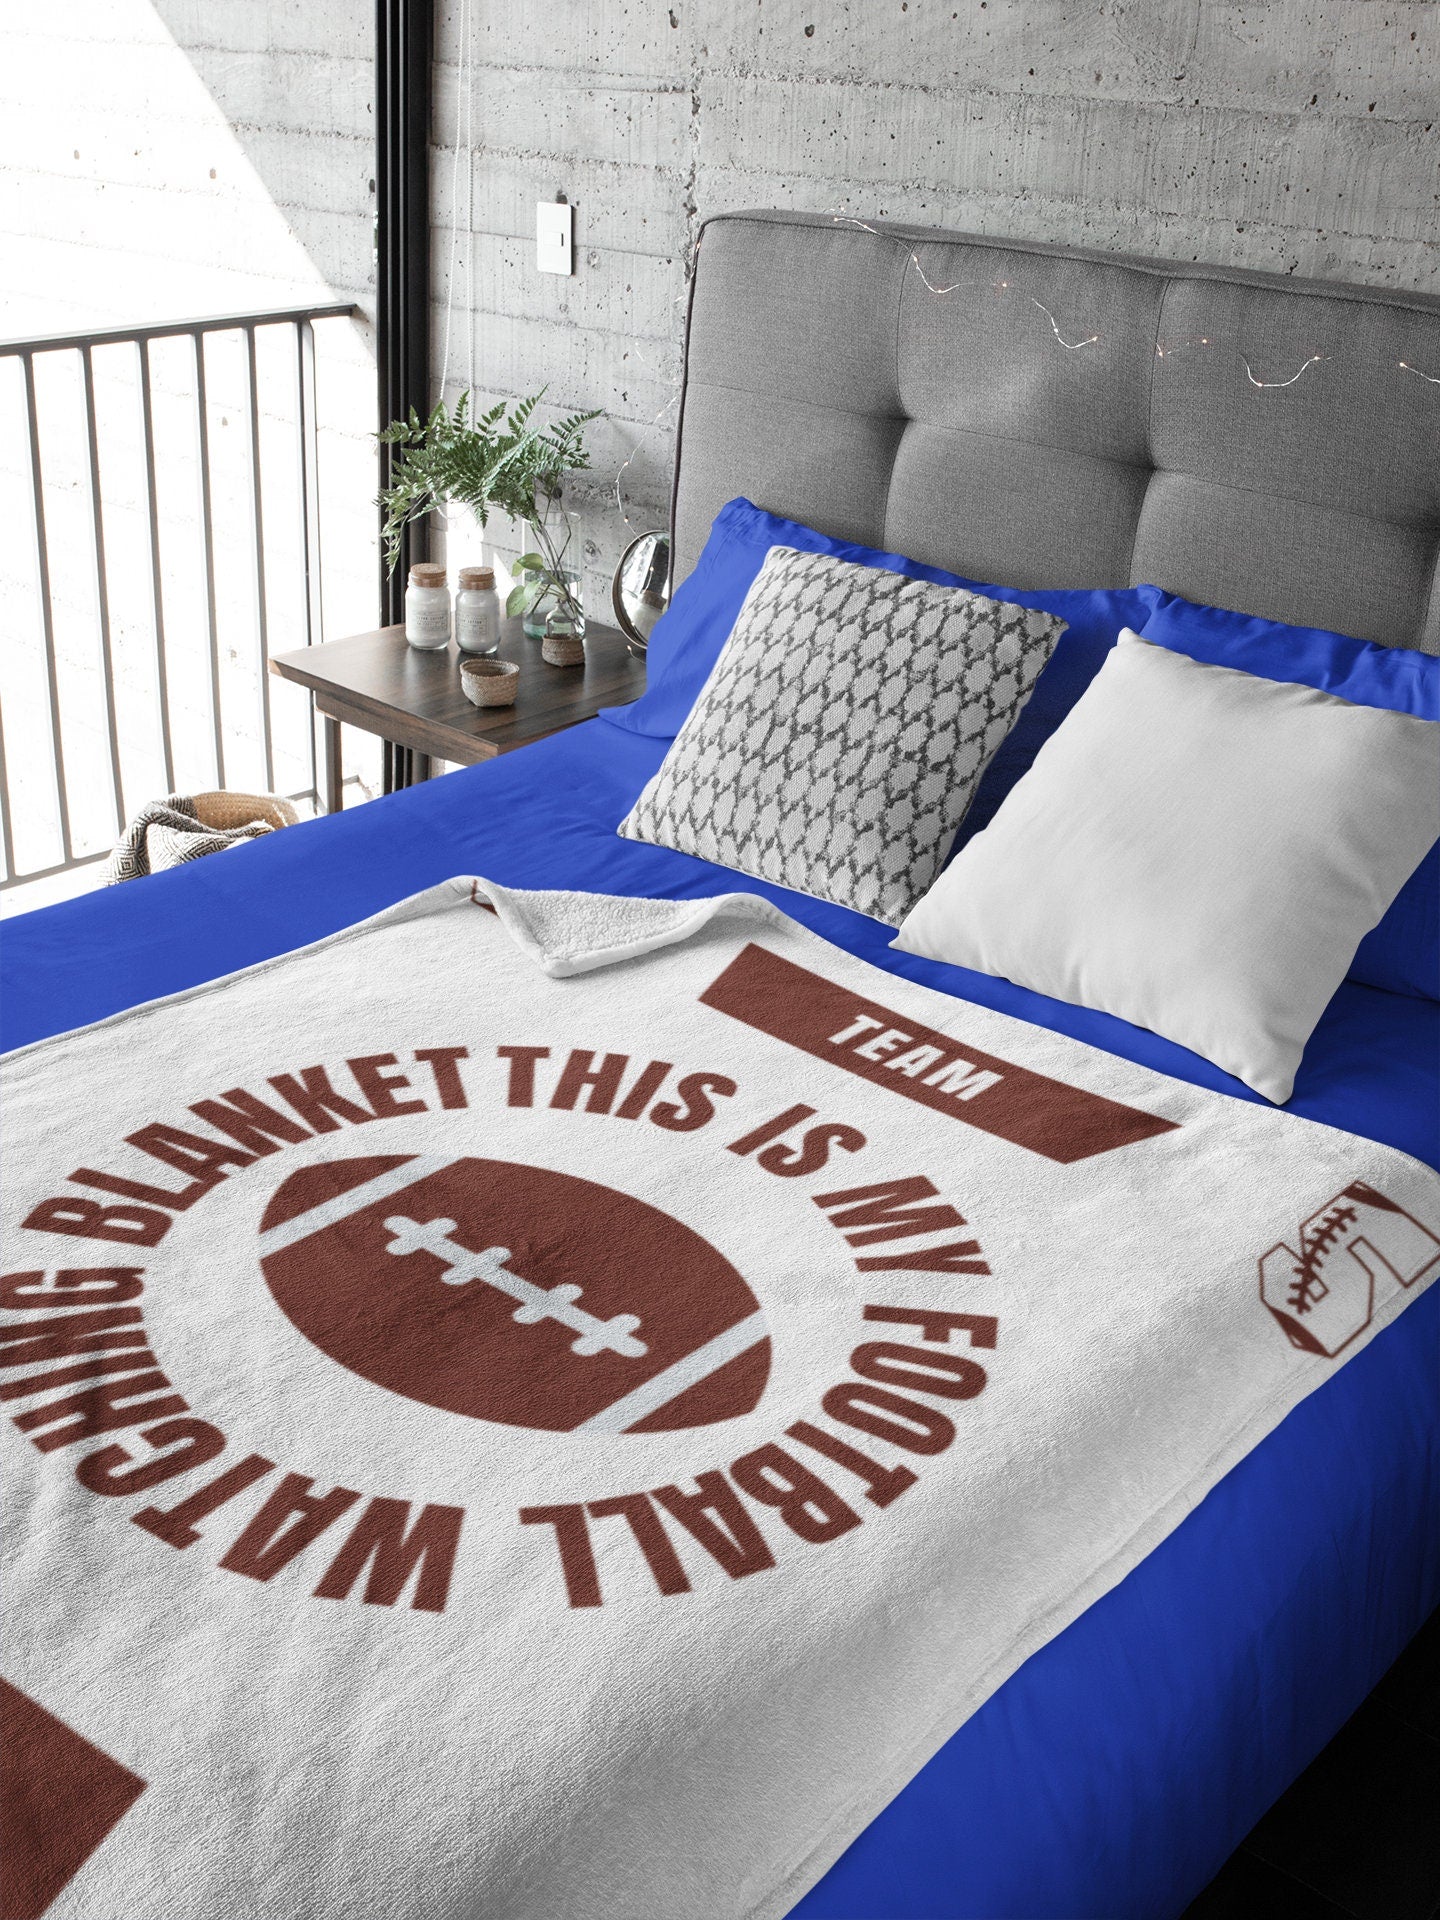 Personalized Blanket Football Sherpa Fleece, Custom Blankets For Football Fans, Cozy Polyester Throw Blanket Gift, Gifts for Sports Fan Dads